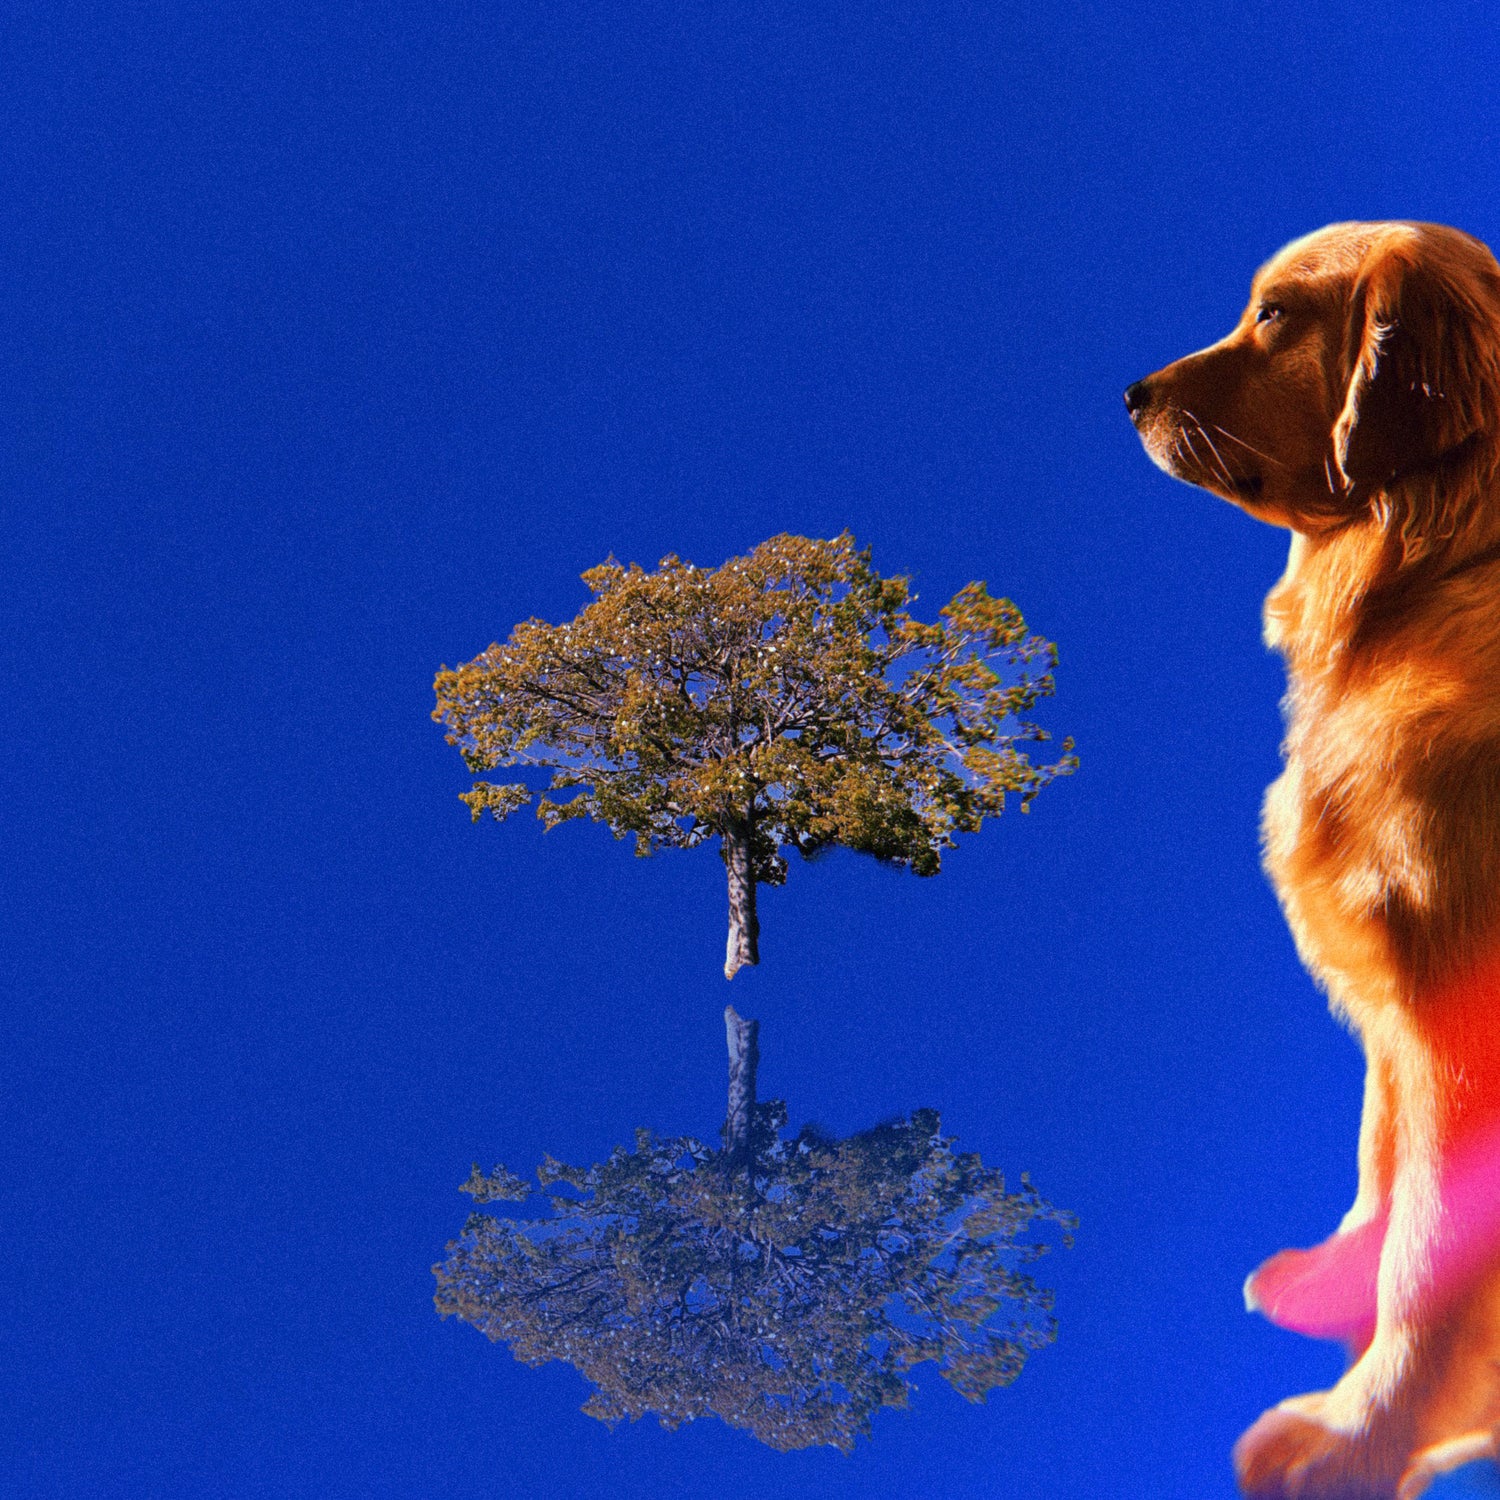 An adolescent female Golden Retriever meditates at dusk with a grown Silk Floss Tree and blue sky in the background